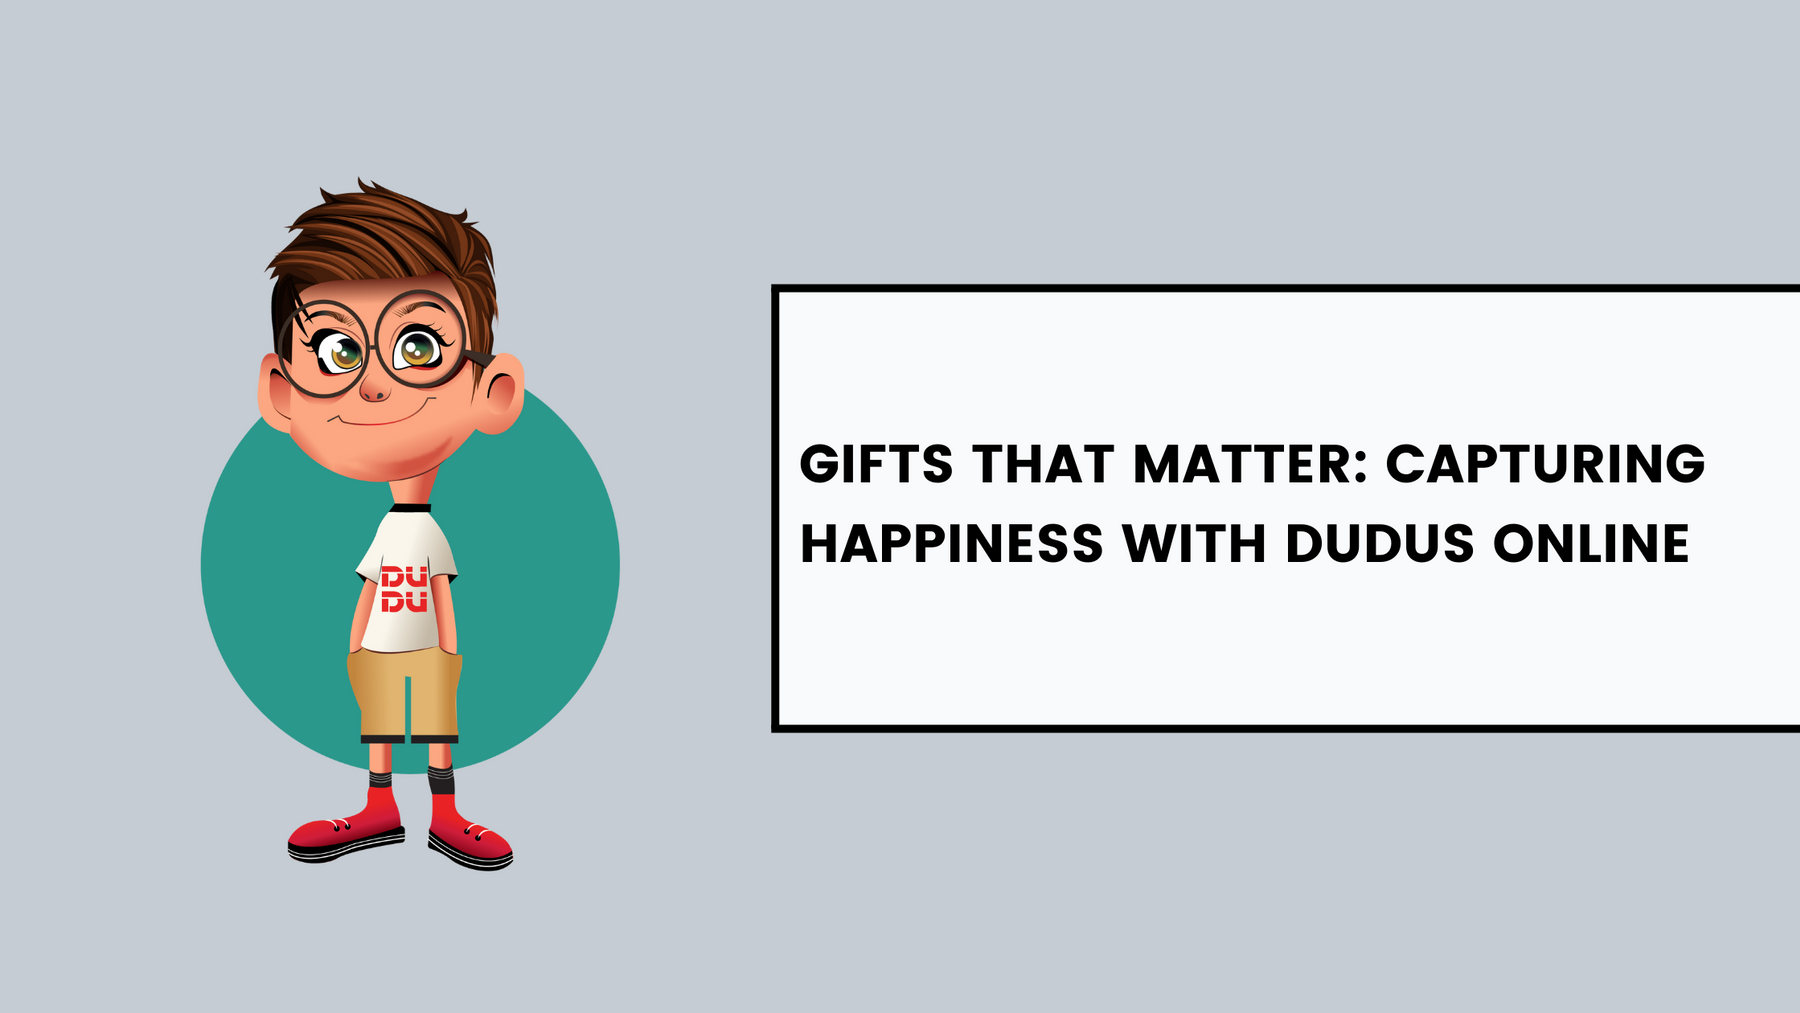 Gifts That Matter: Capturing Happiness With Dudus Online